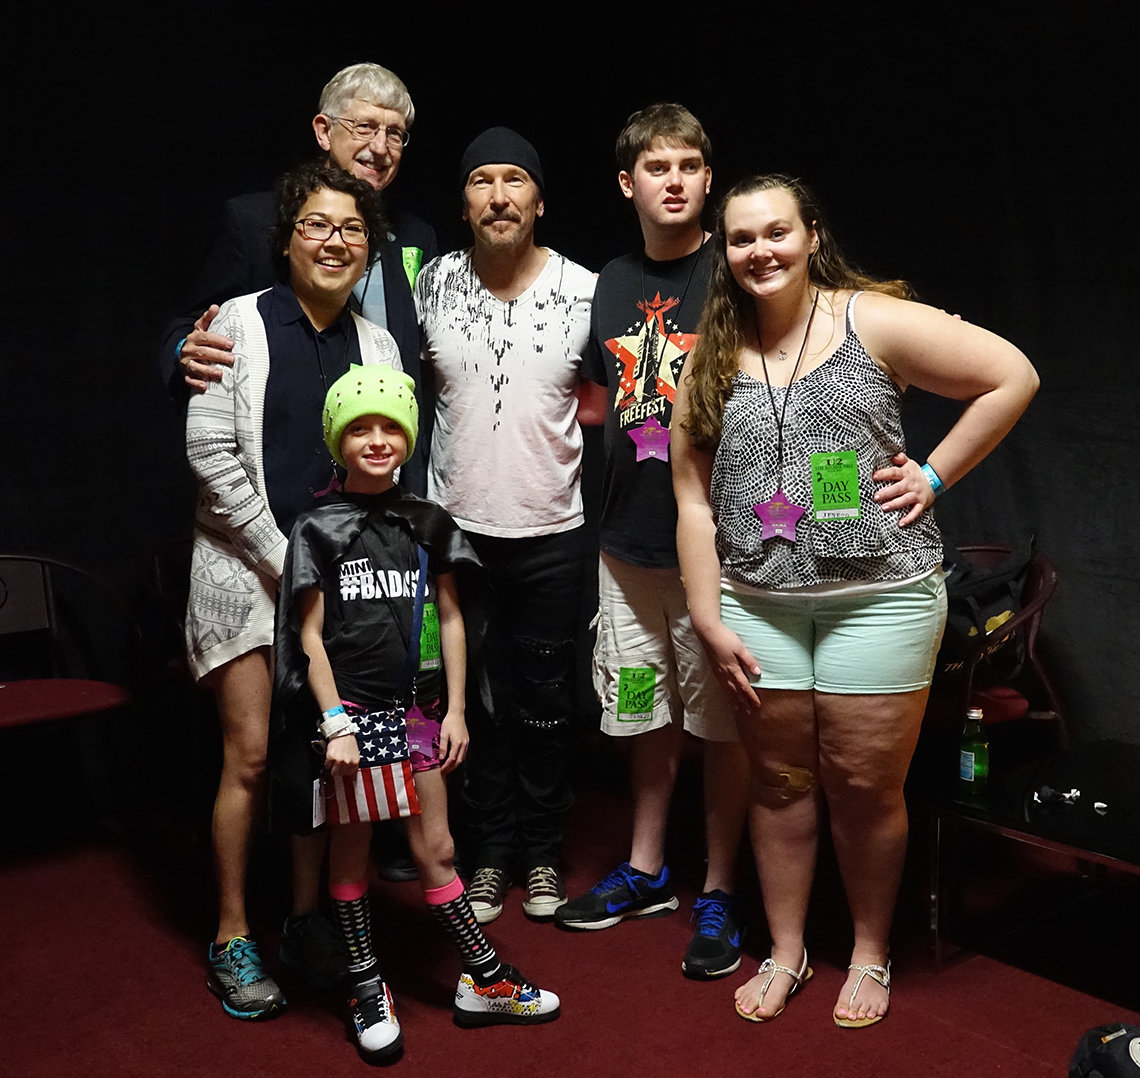 The Edge poses with all kids